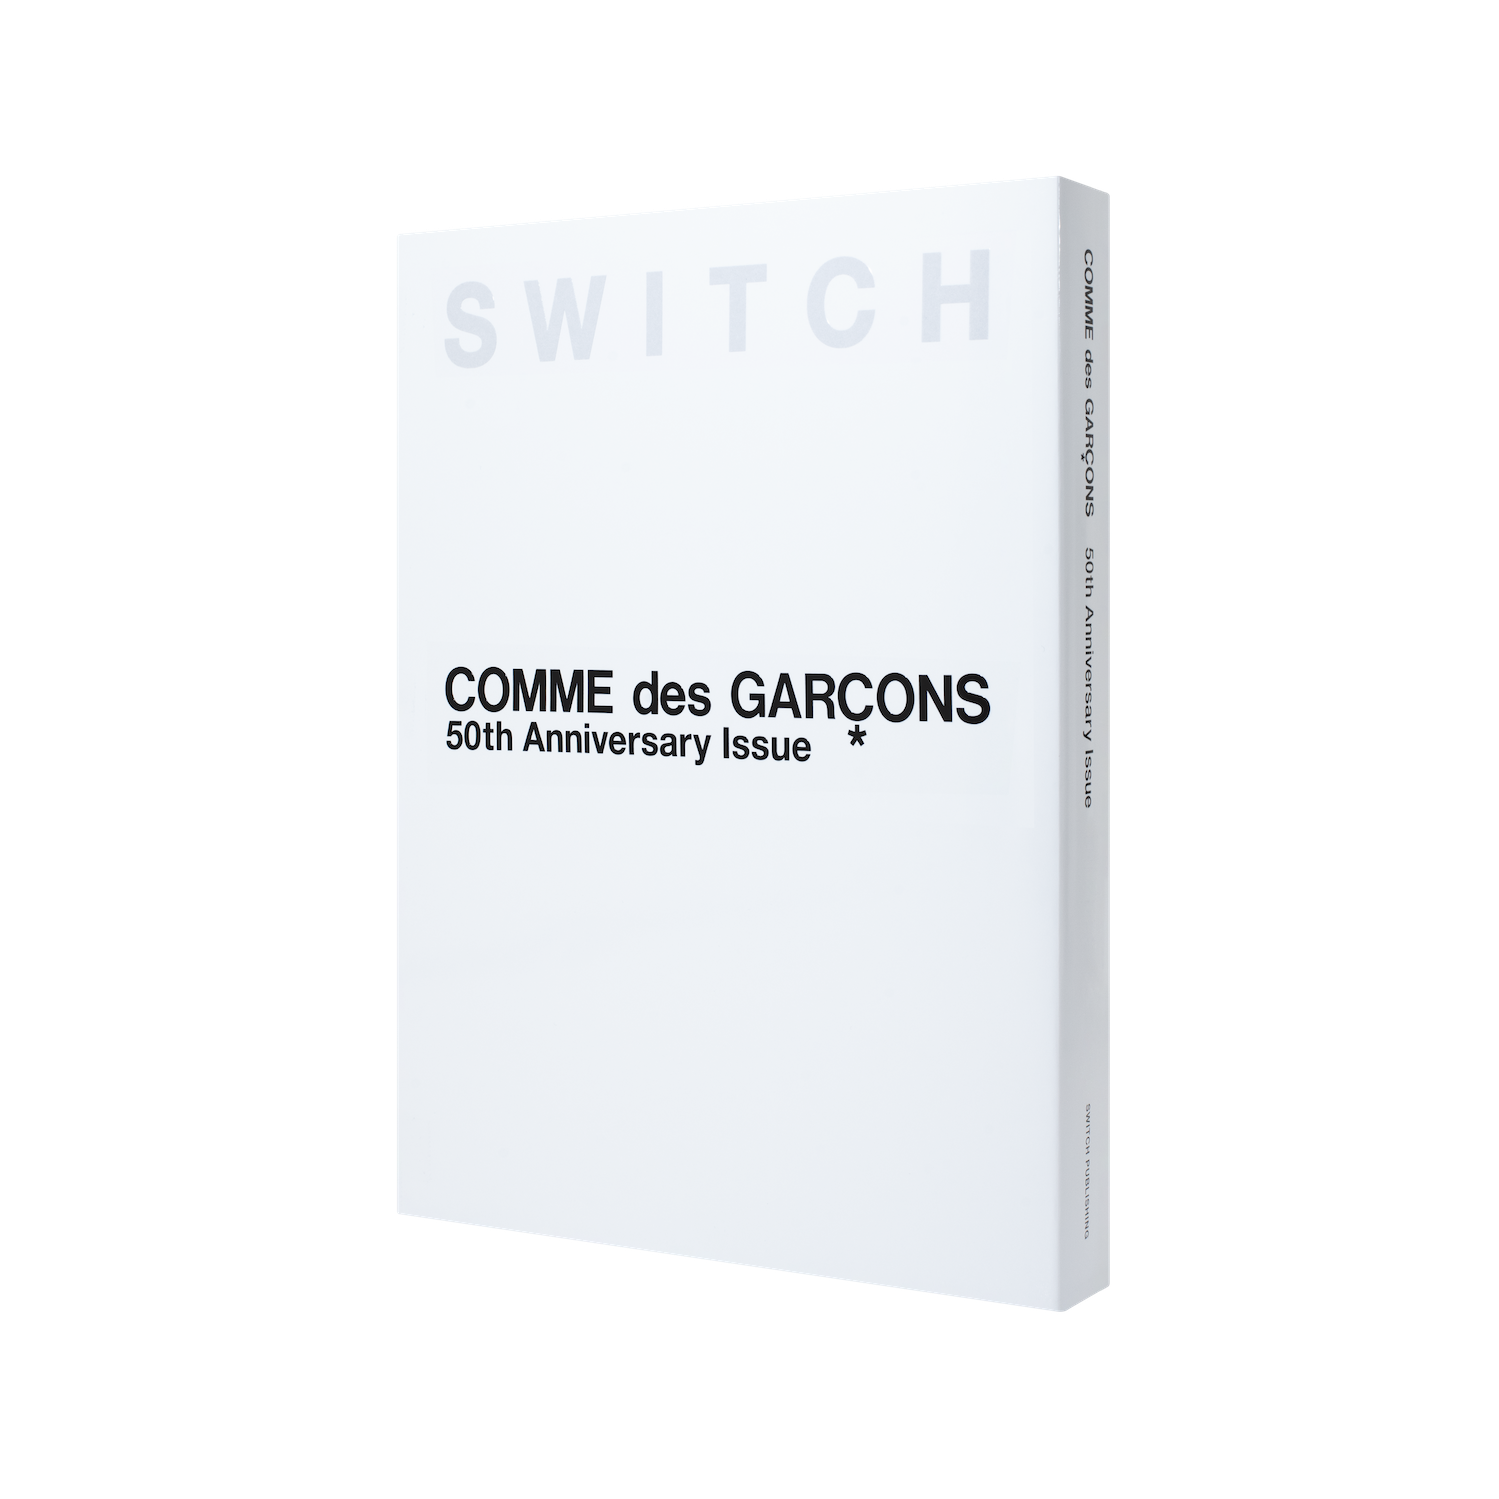 SWITCH special edition COMME des GARÇONS 50th Anniversary Issue 4月25日発売